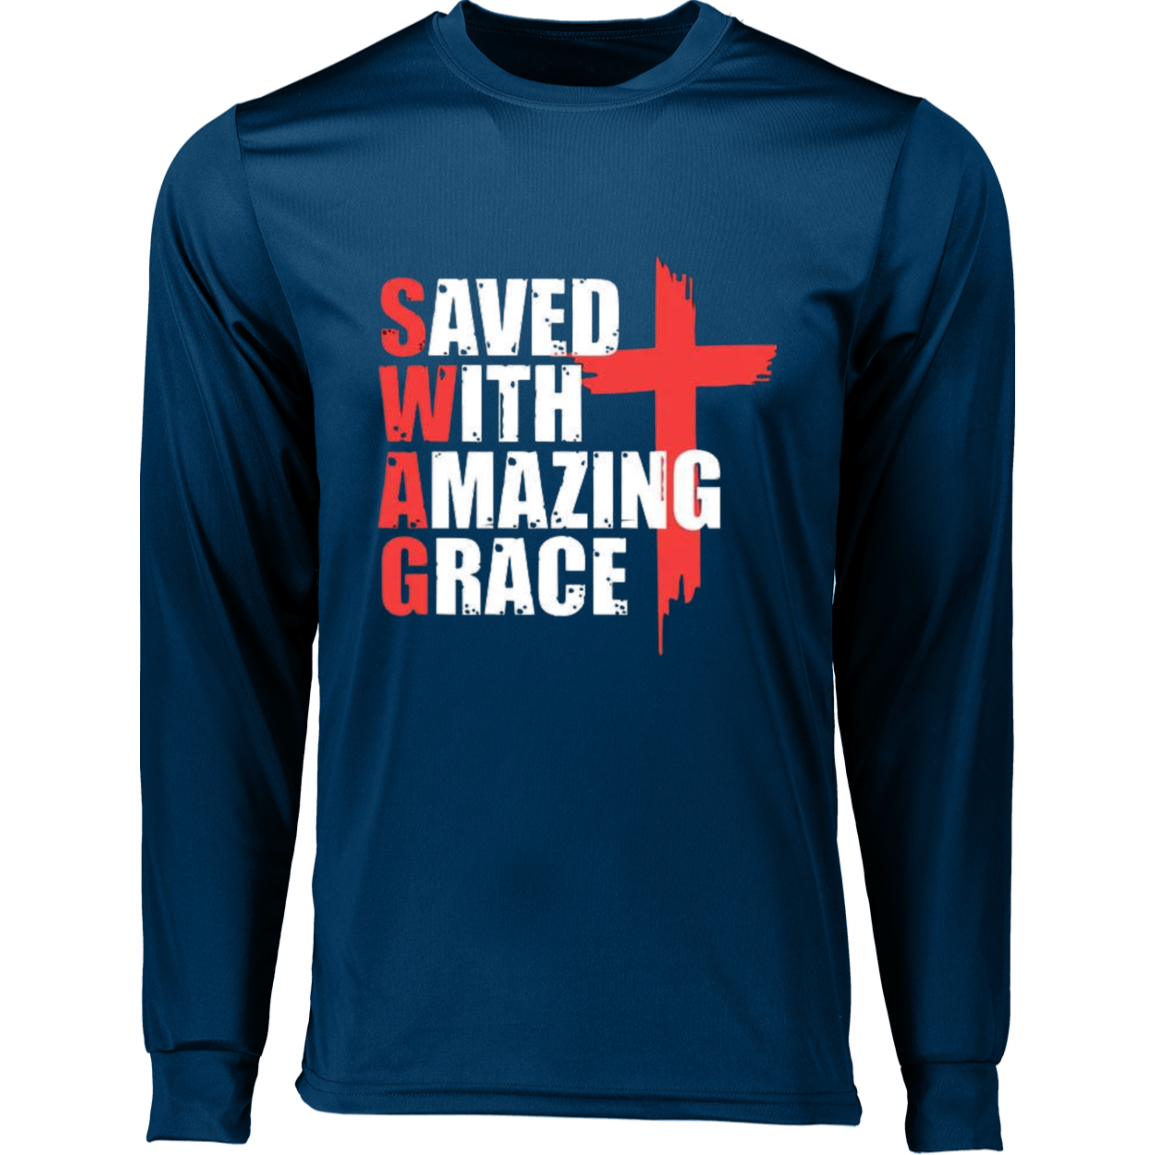 Saved With Amazing Grace Long Sleeve Moisture-Wicking Tee, Long Sleeve Tee, T-Shirt, Men's Crewneck, Unisex Fit